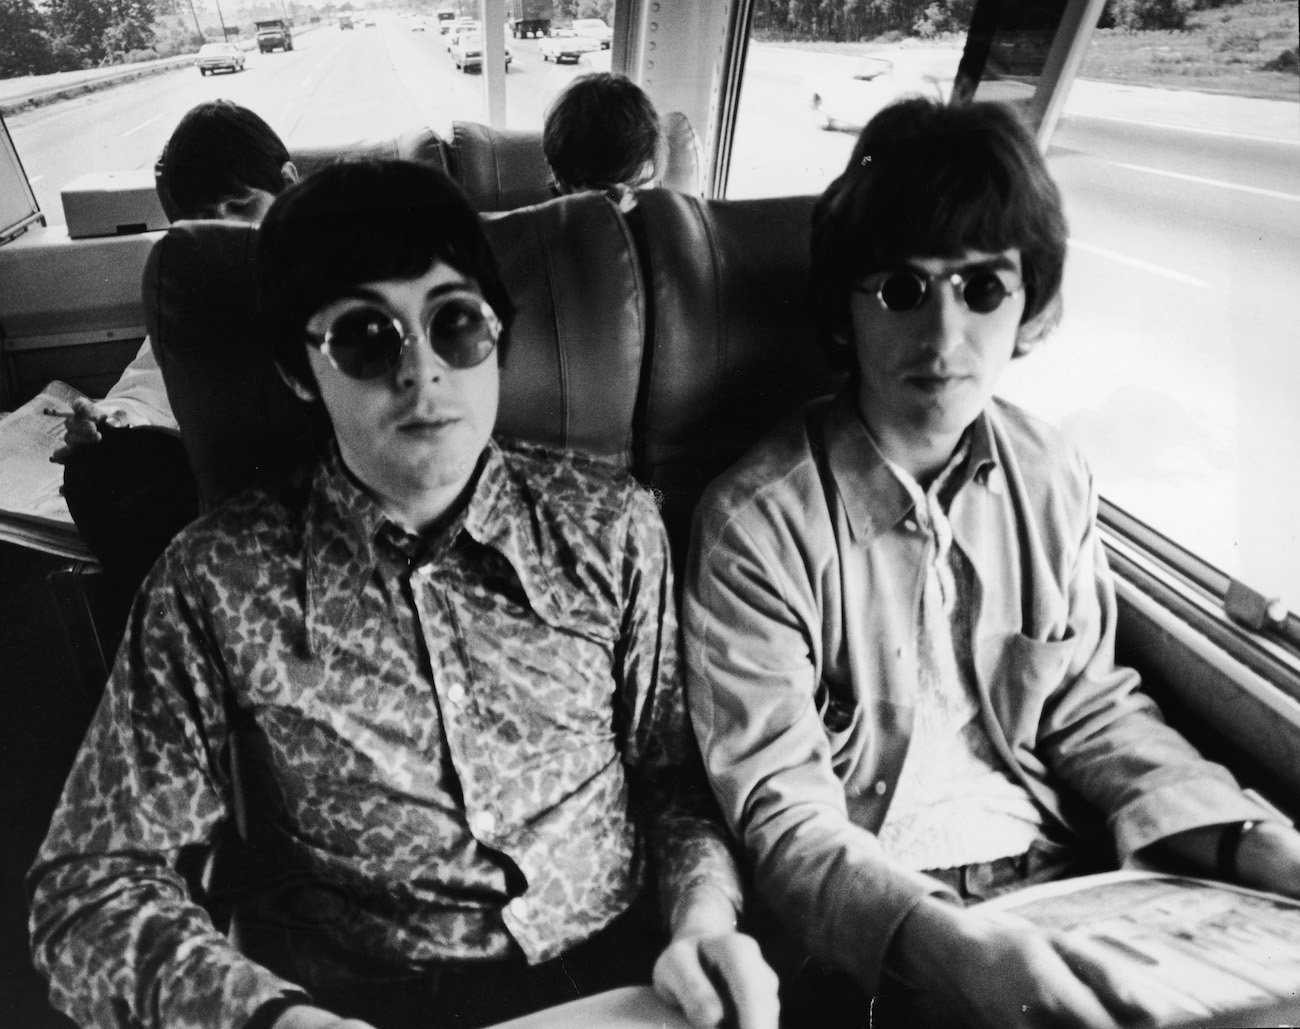 George Harrison and Paul McCartney on a bus in 1966.